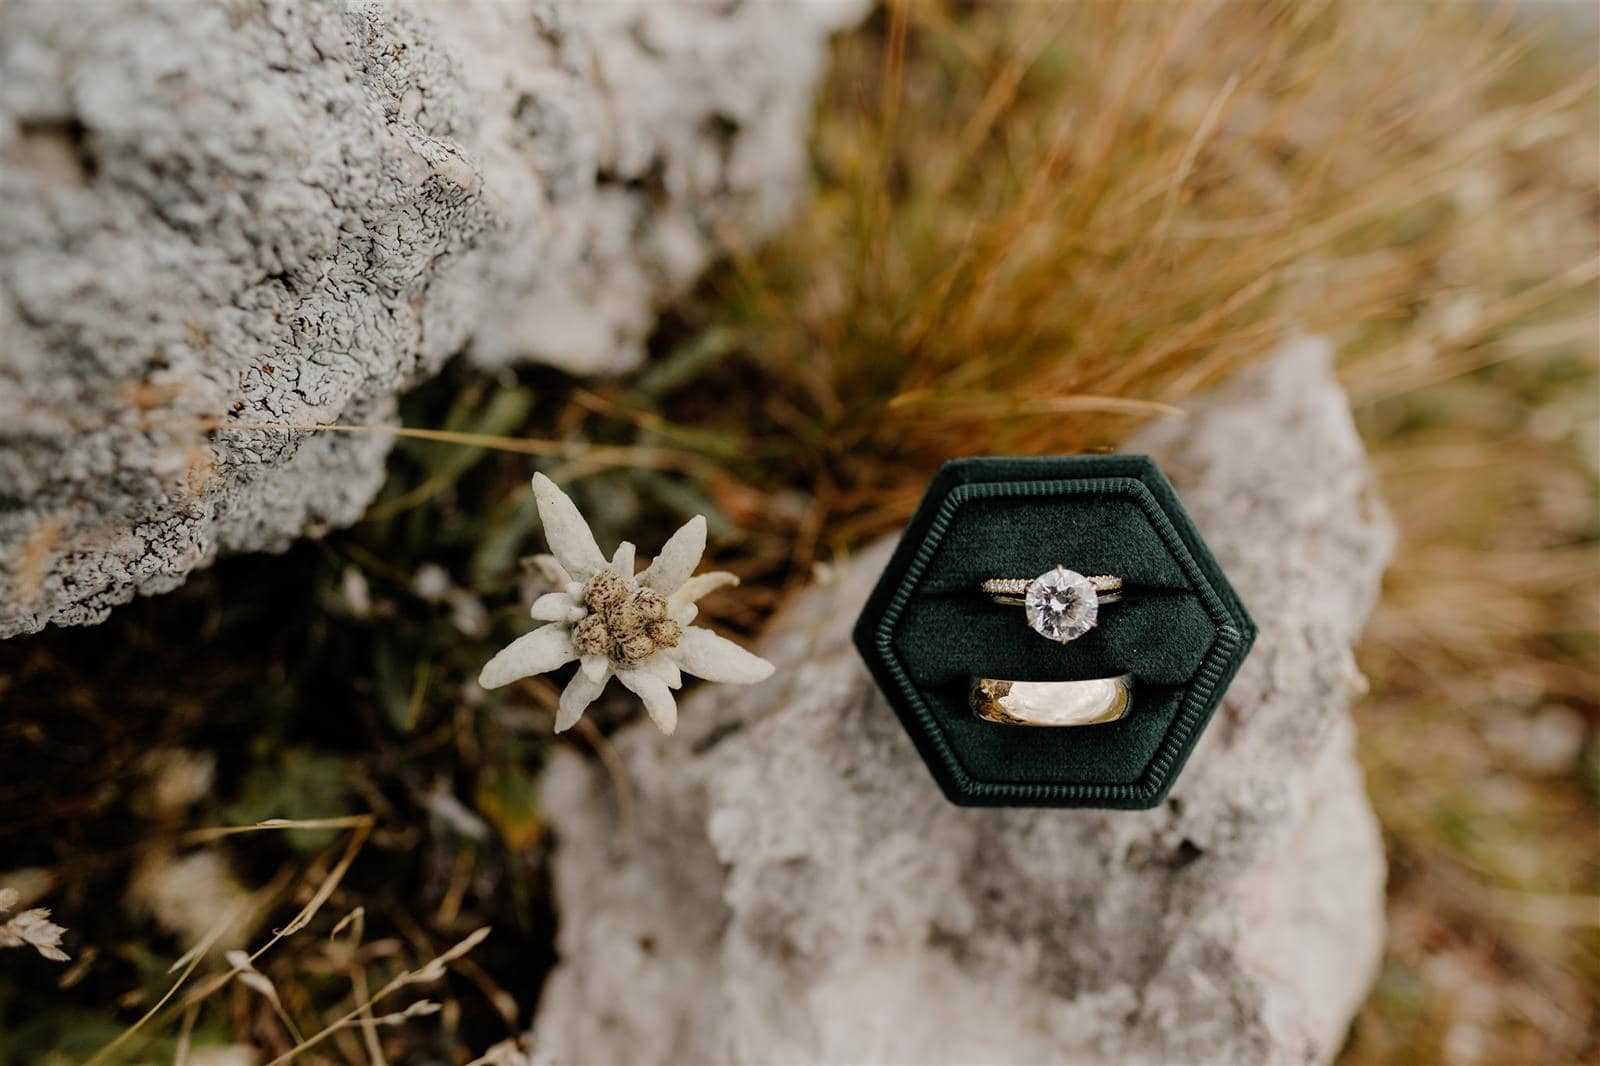 A green velvet ring box sits on a rock next to a wild edelweiss flower. In the ring box there is a gold wedding band and a diamond engagement ring.